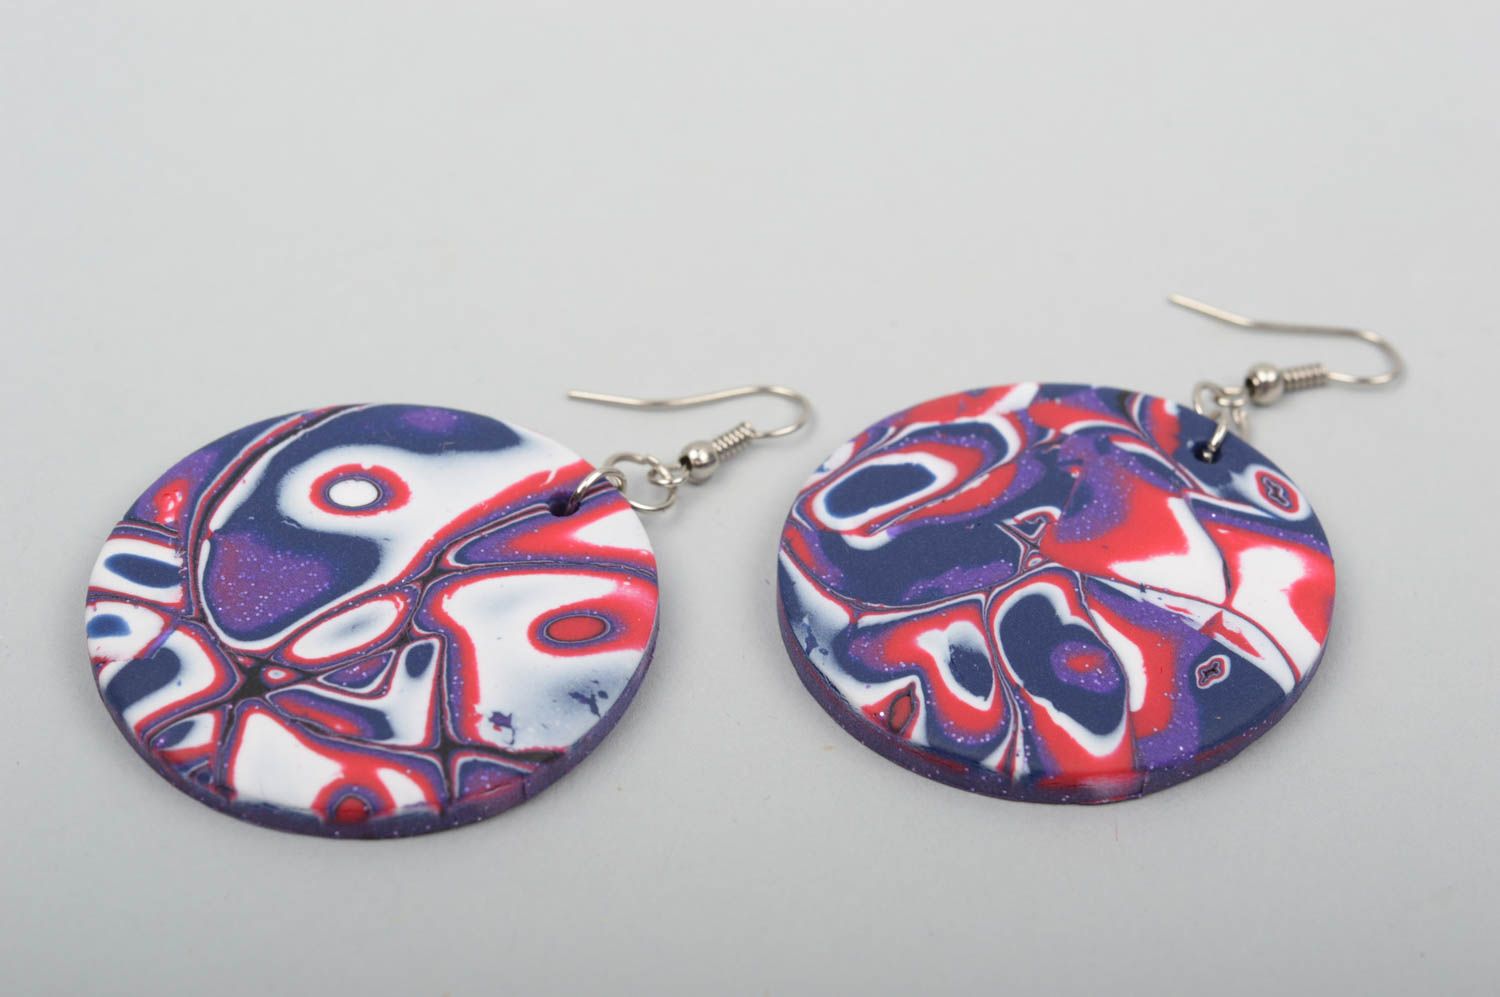 Handmade earrings designer jewelry polymer clay stylish earrings gifts for her photo 4